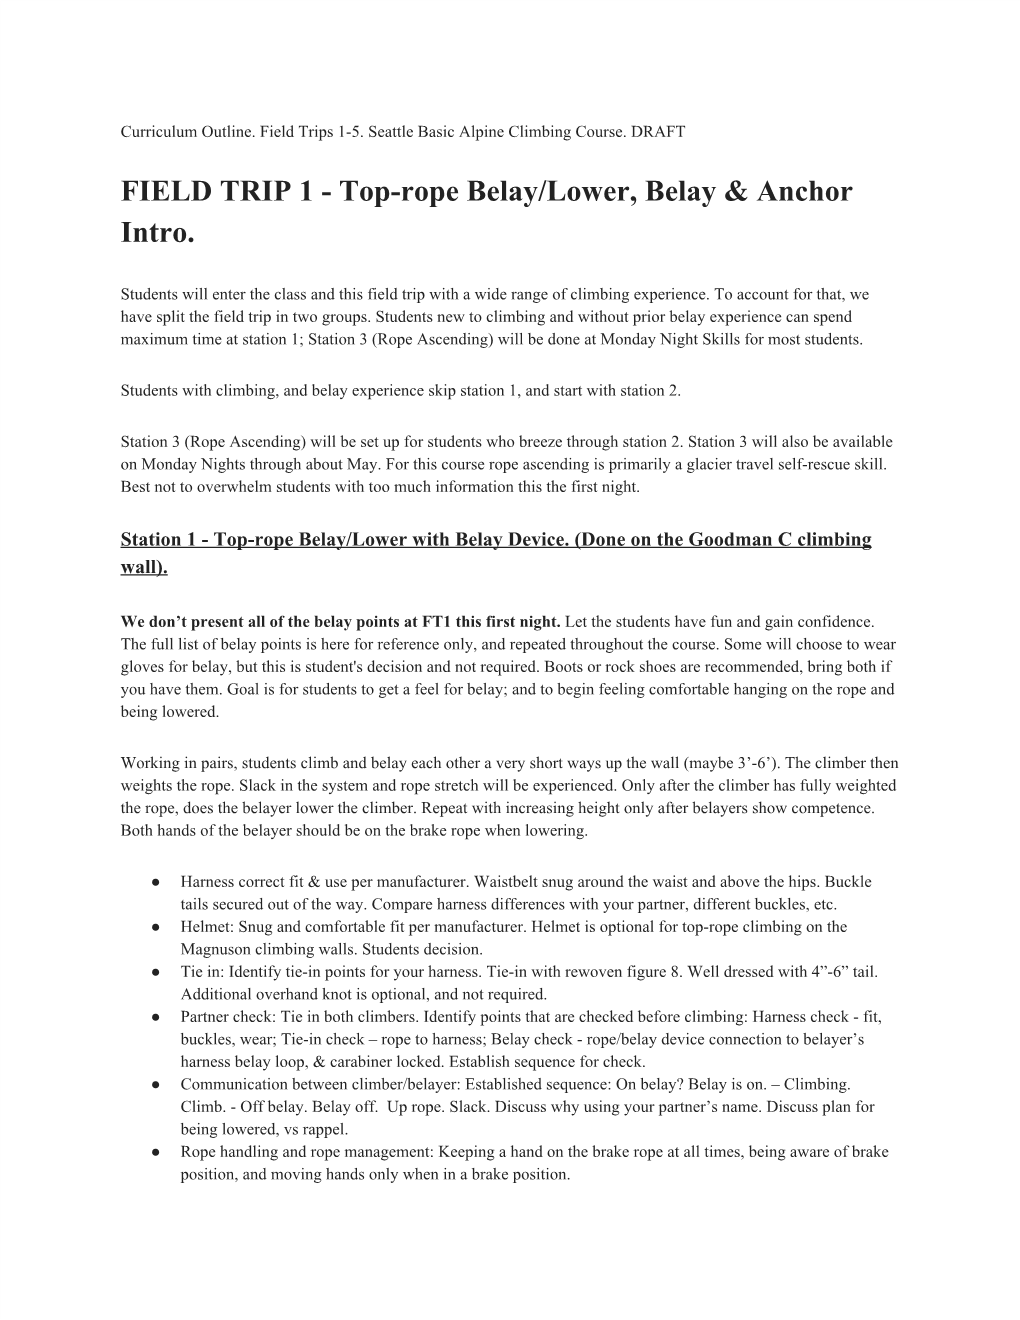 Top-Rope Belay/Lower, Belay & Anchor Intro